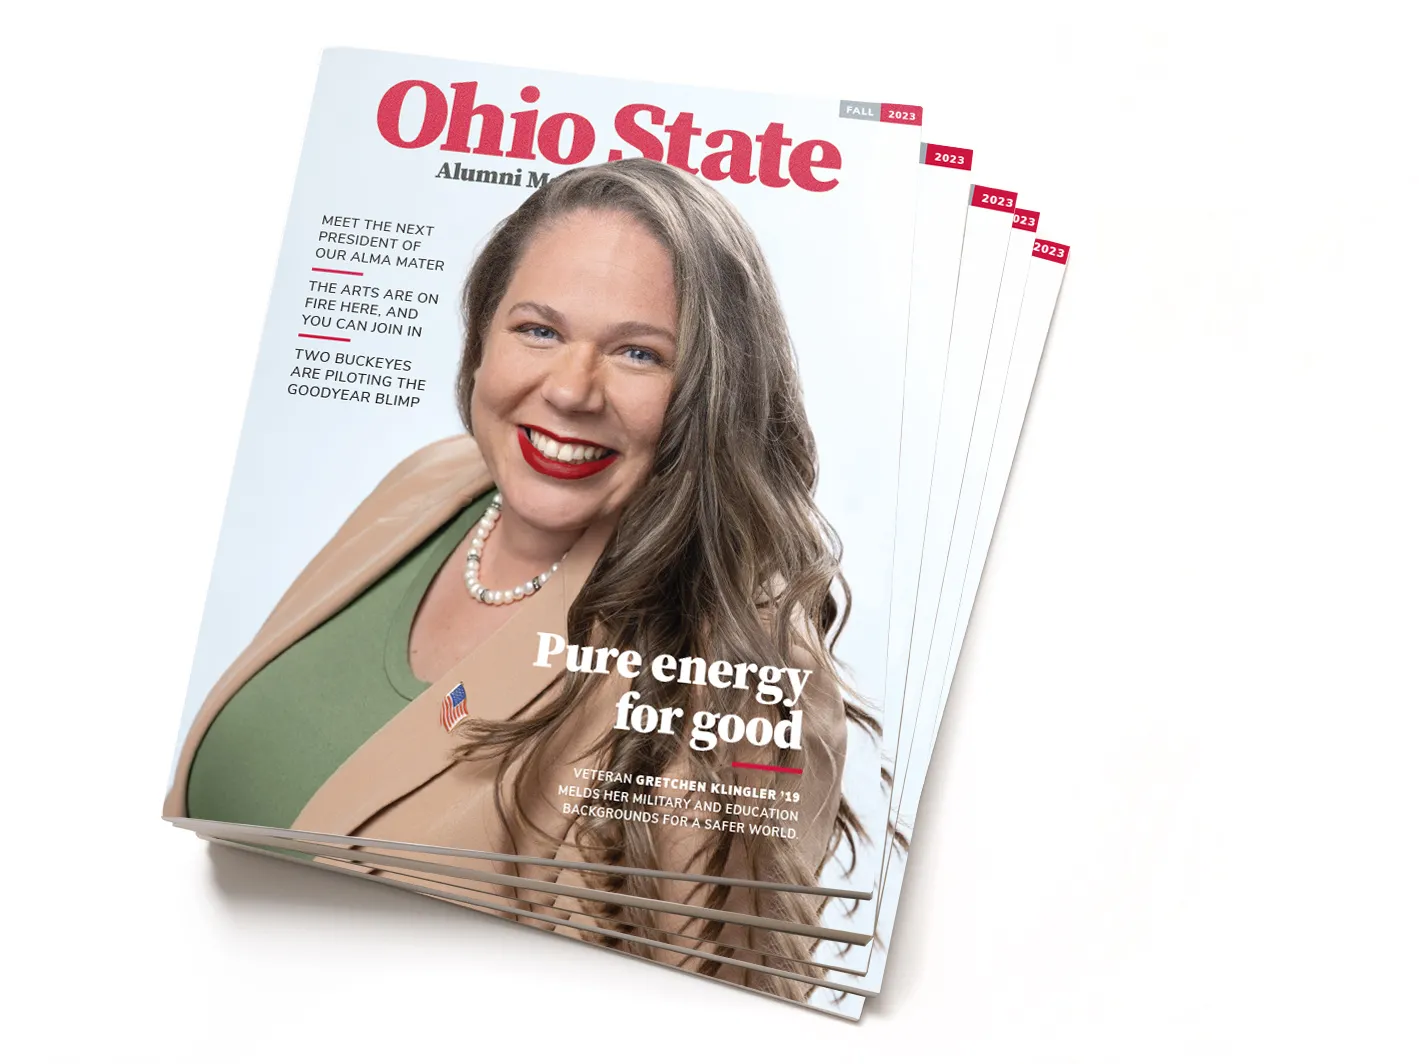 This photo shows a stack of Fall 2023 editions of Ohio State Alumni Magazine. The cover shows Gretchen Klinger, a smiling woman with long hair and bright lipstick wearing a business suit. She's leaning slightly toward the camera, as if getting ready to have a conversation with the reader or warmly greet them. The main headline says “Pure energy for good.”